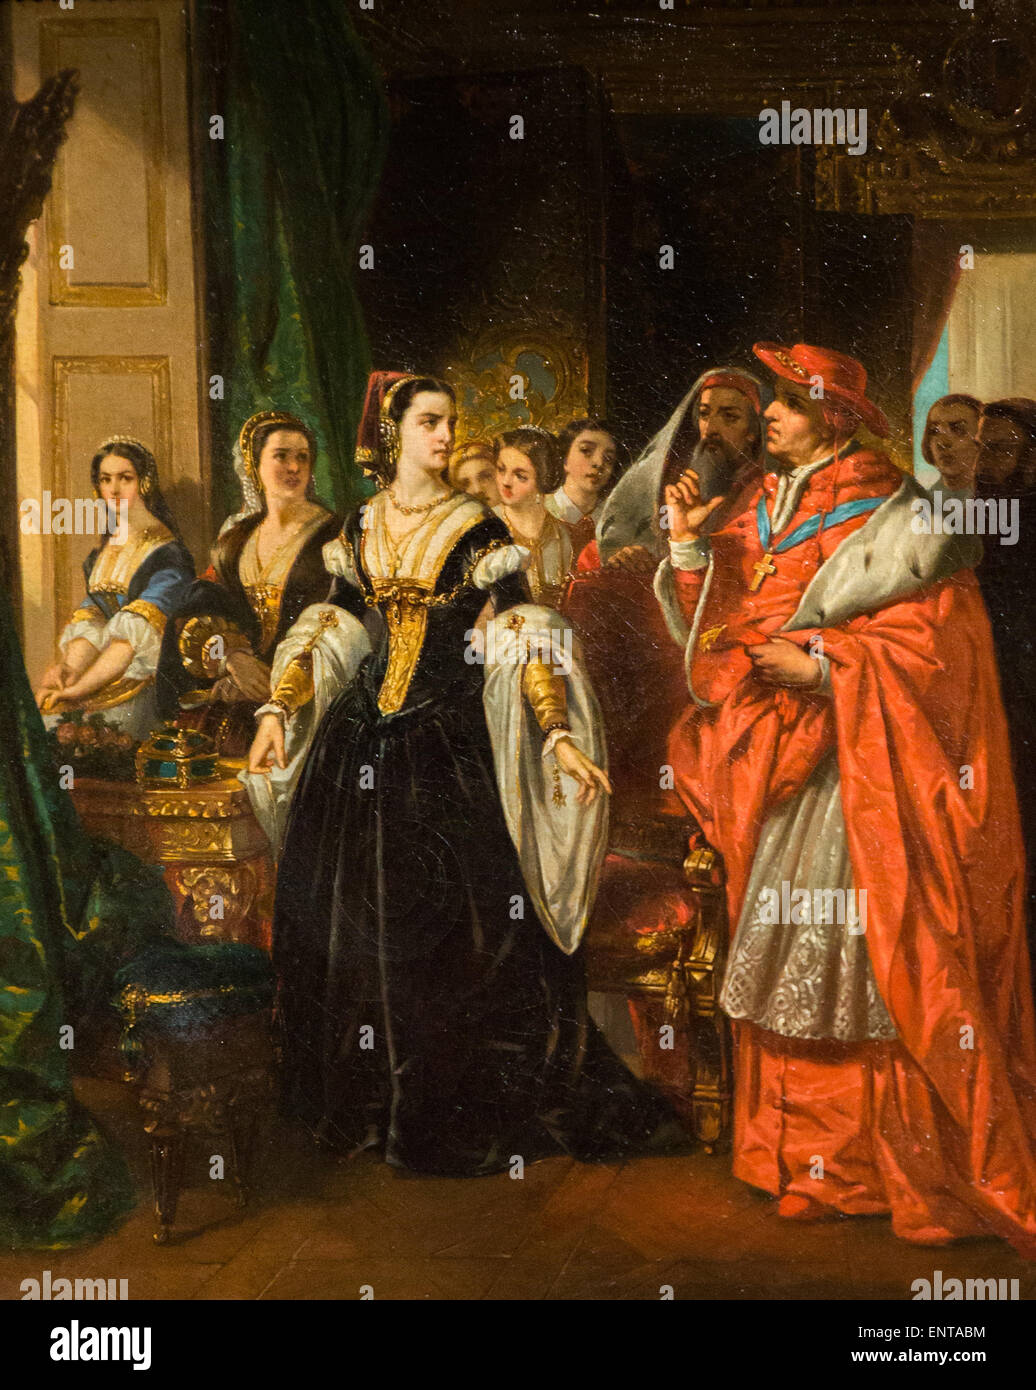 ActiveMuseum 0005942.jpg / The divorce of Henri VIII. The cardinal Wolsey  preventing Catherine of Aragon 05/12/2013  -   / 19th century Collection / Active Museum Stock Photo